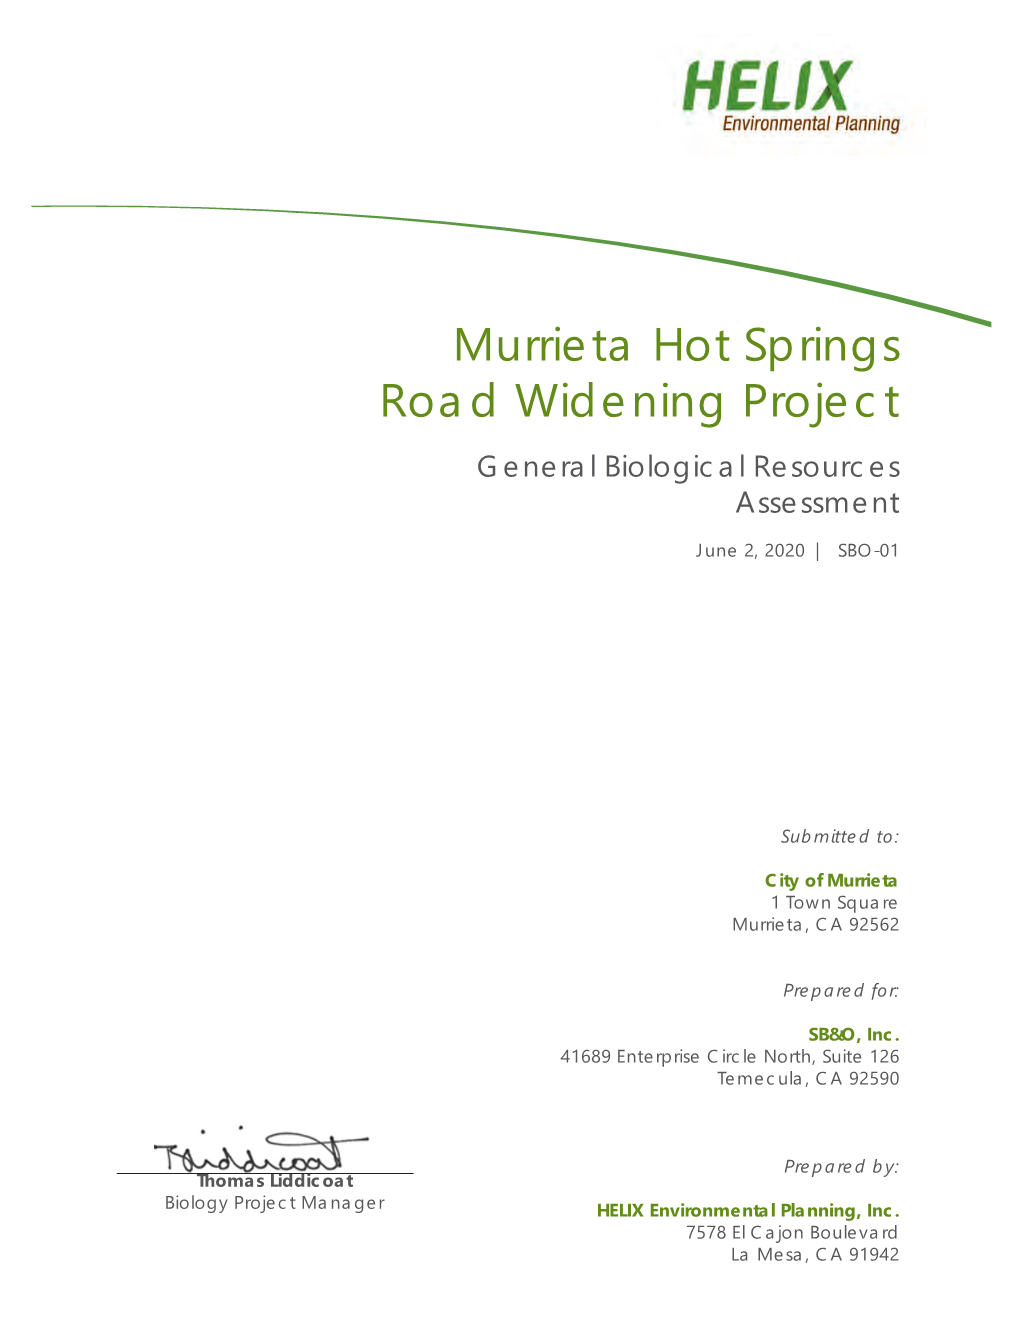 Murrieta Hot Springs Road Widening Project General Biological Resources Assessment